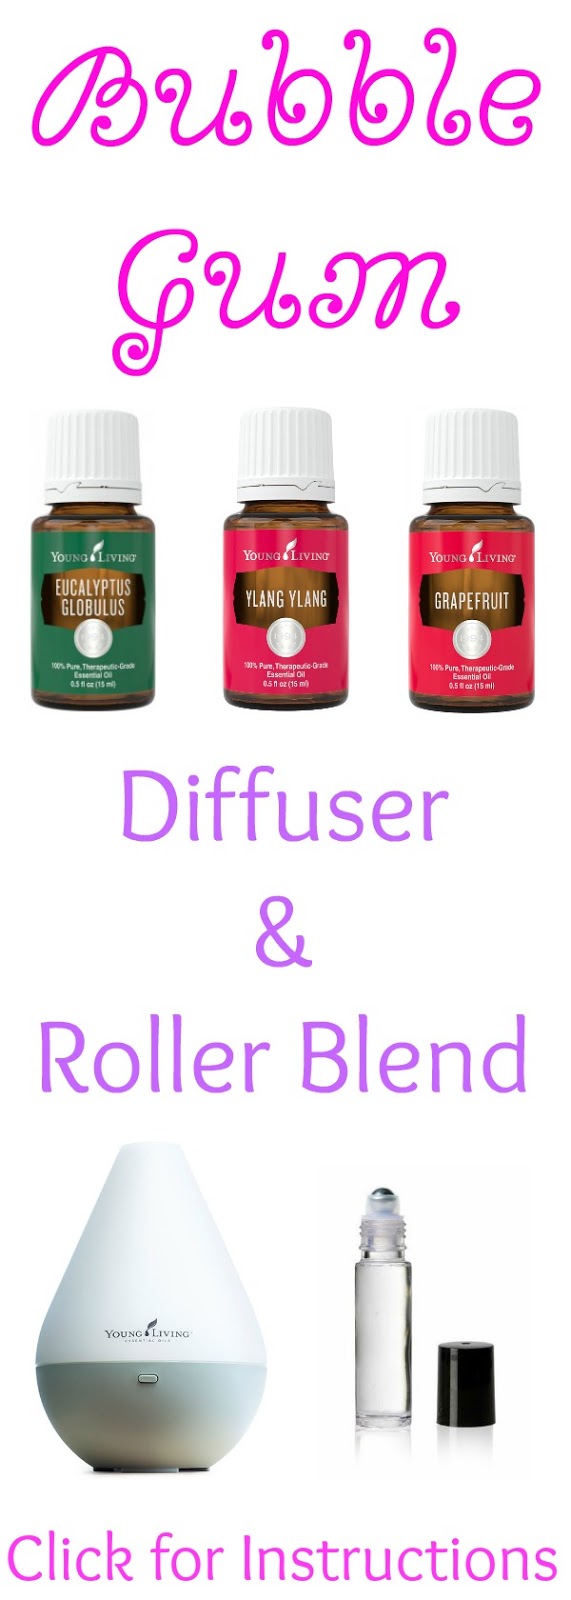 A fresh and fun diffuser or roller blend to use with Eucalyptus, Ylang Ylang and Grapefruit Young Living Essential Oils! You and your home will smell absolutely amazing! Bubble Gum Diffuser and Roller Blend from Mama Loves Her Oils!